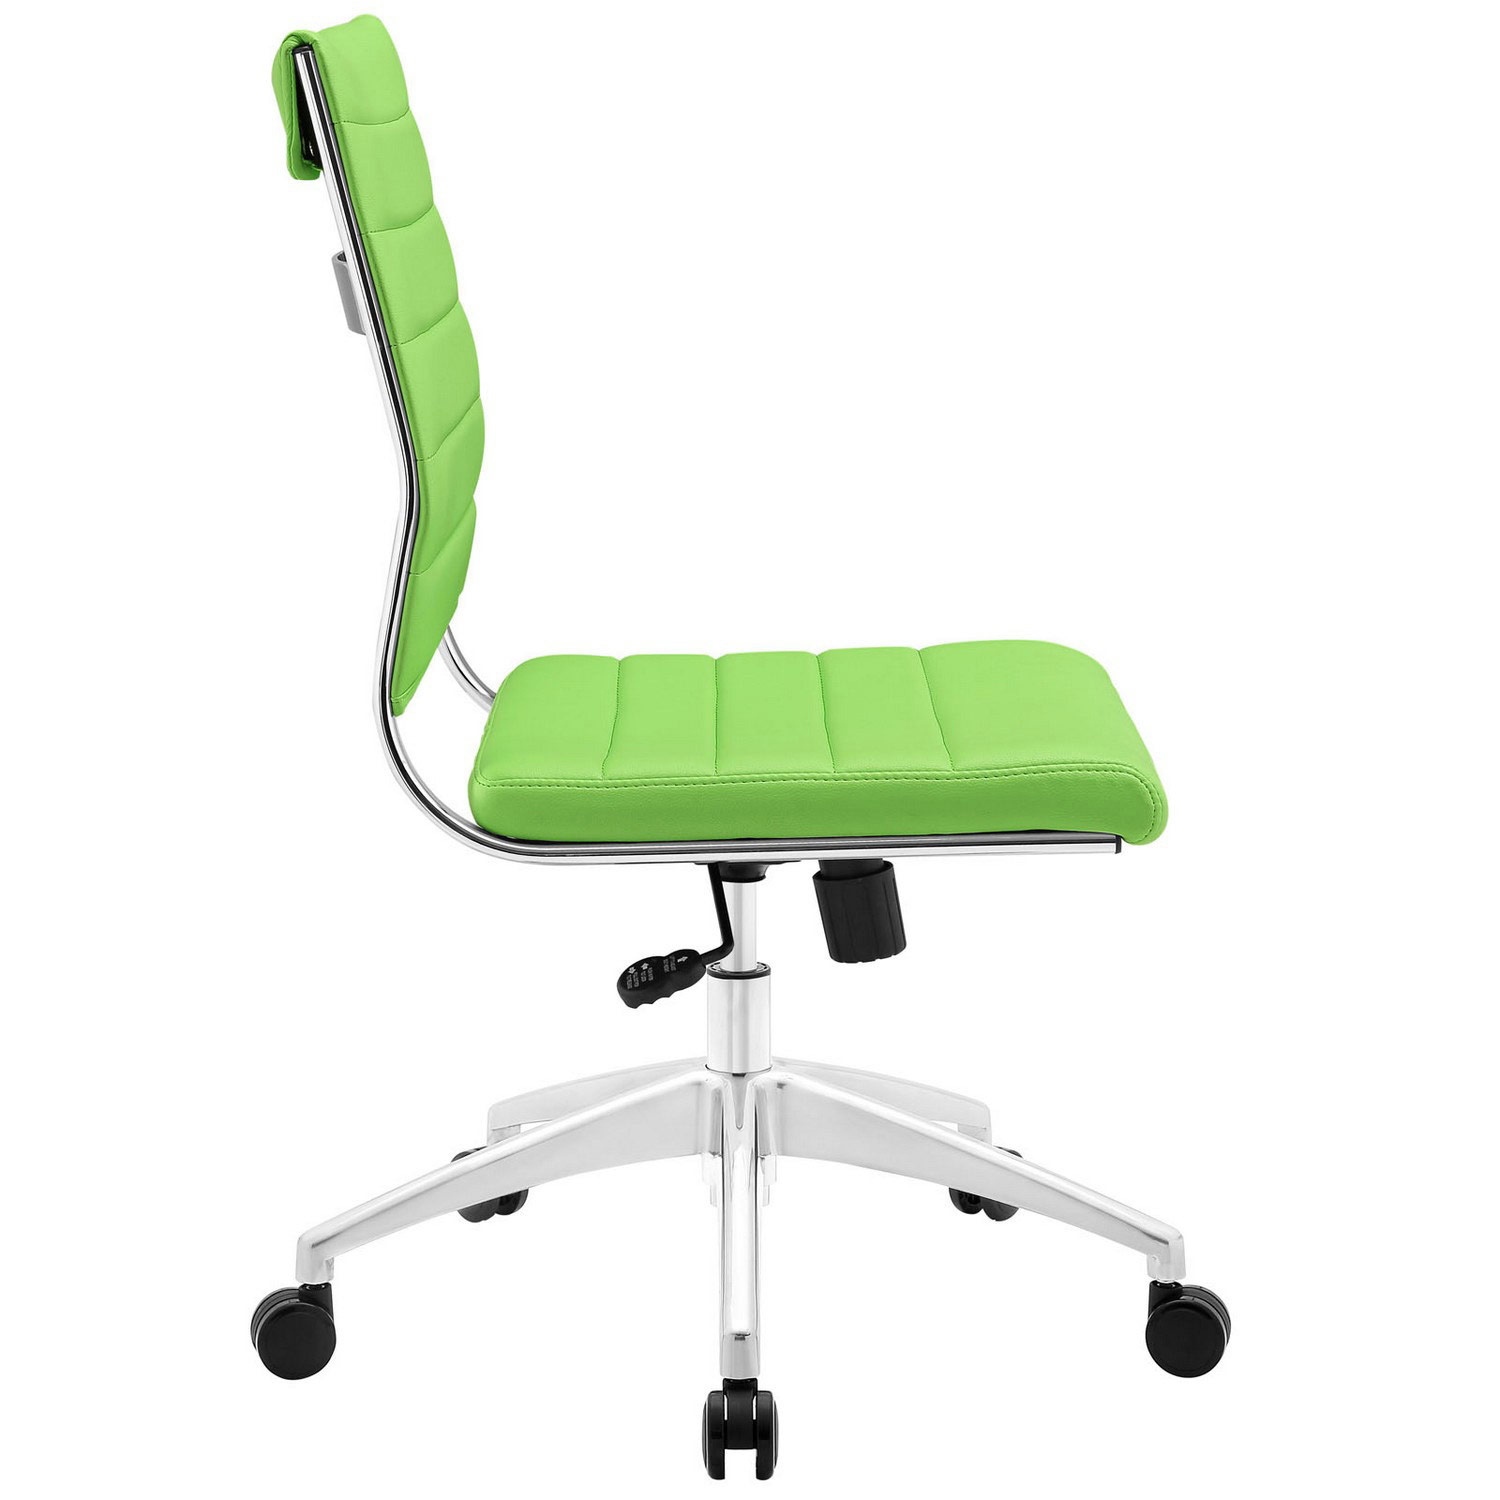 Modway Jive Armless Mid Back Office Chair - Bright Green